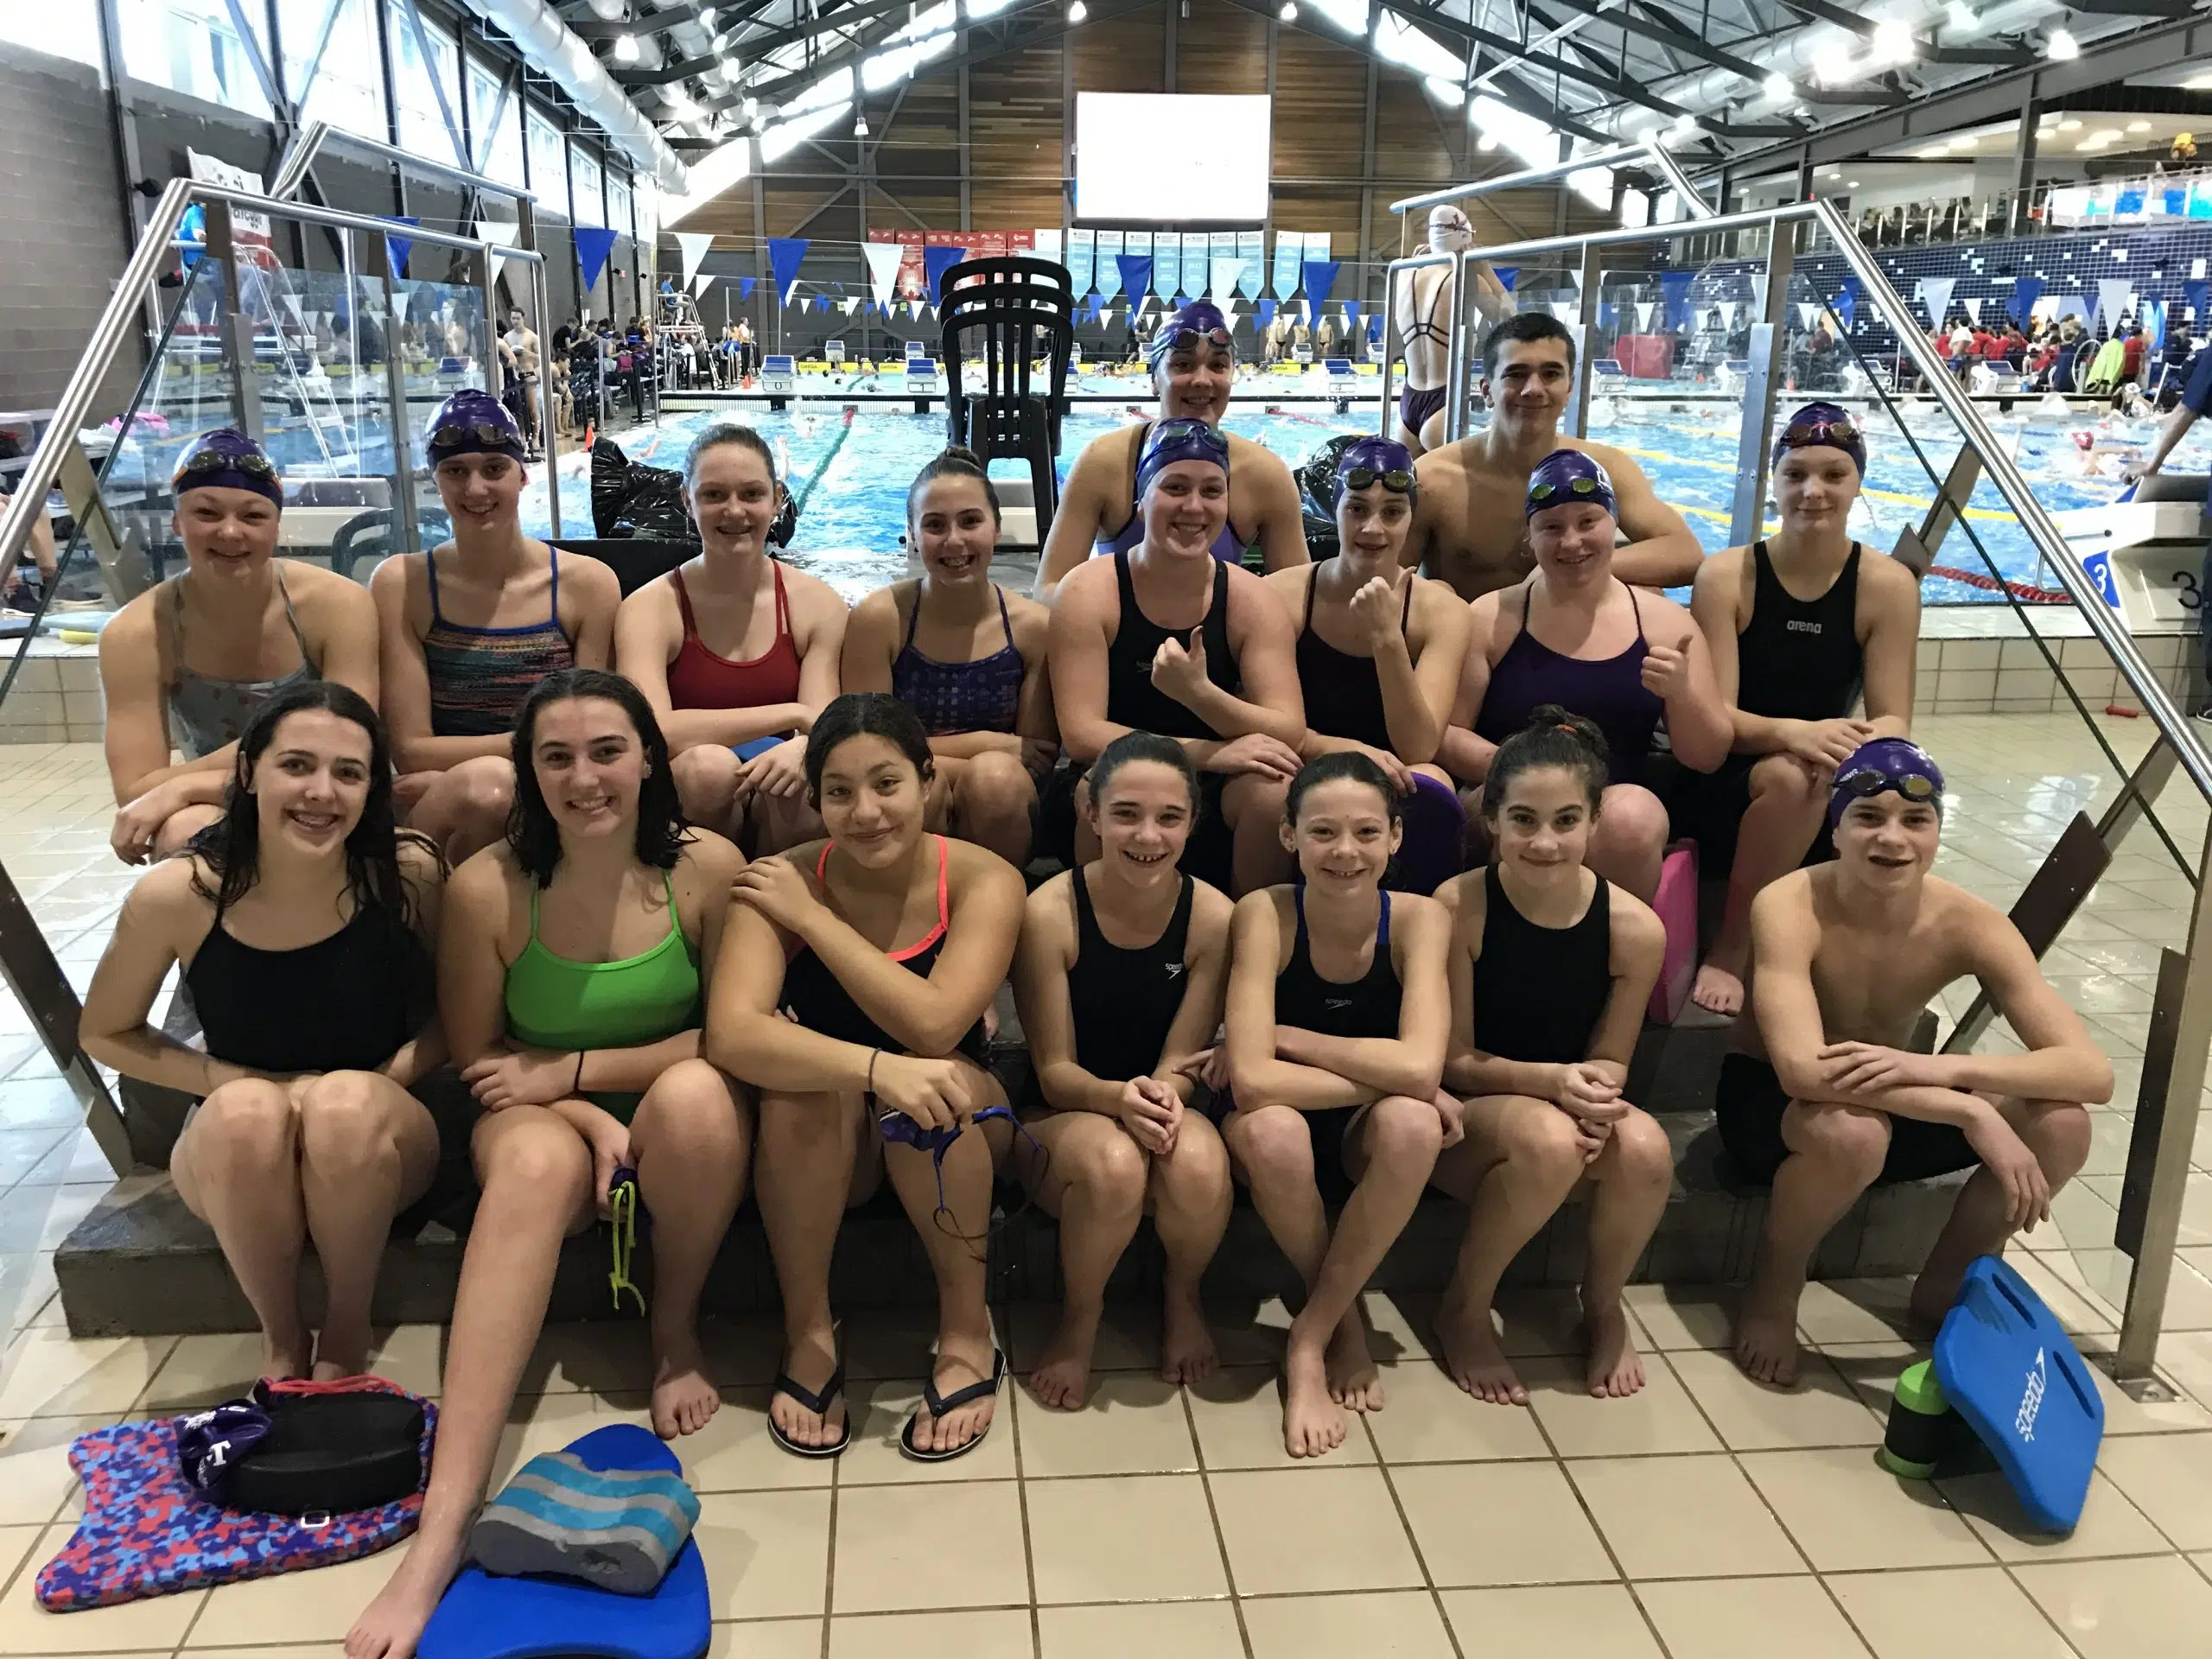 Belleville swimmers compete in Pointe Claire